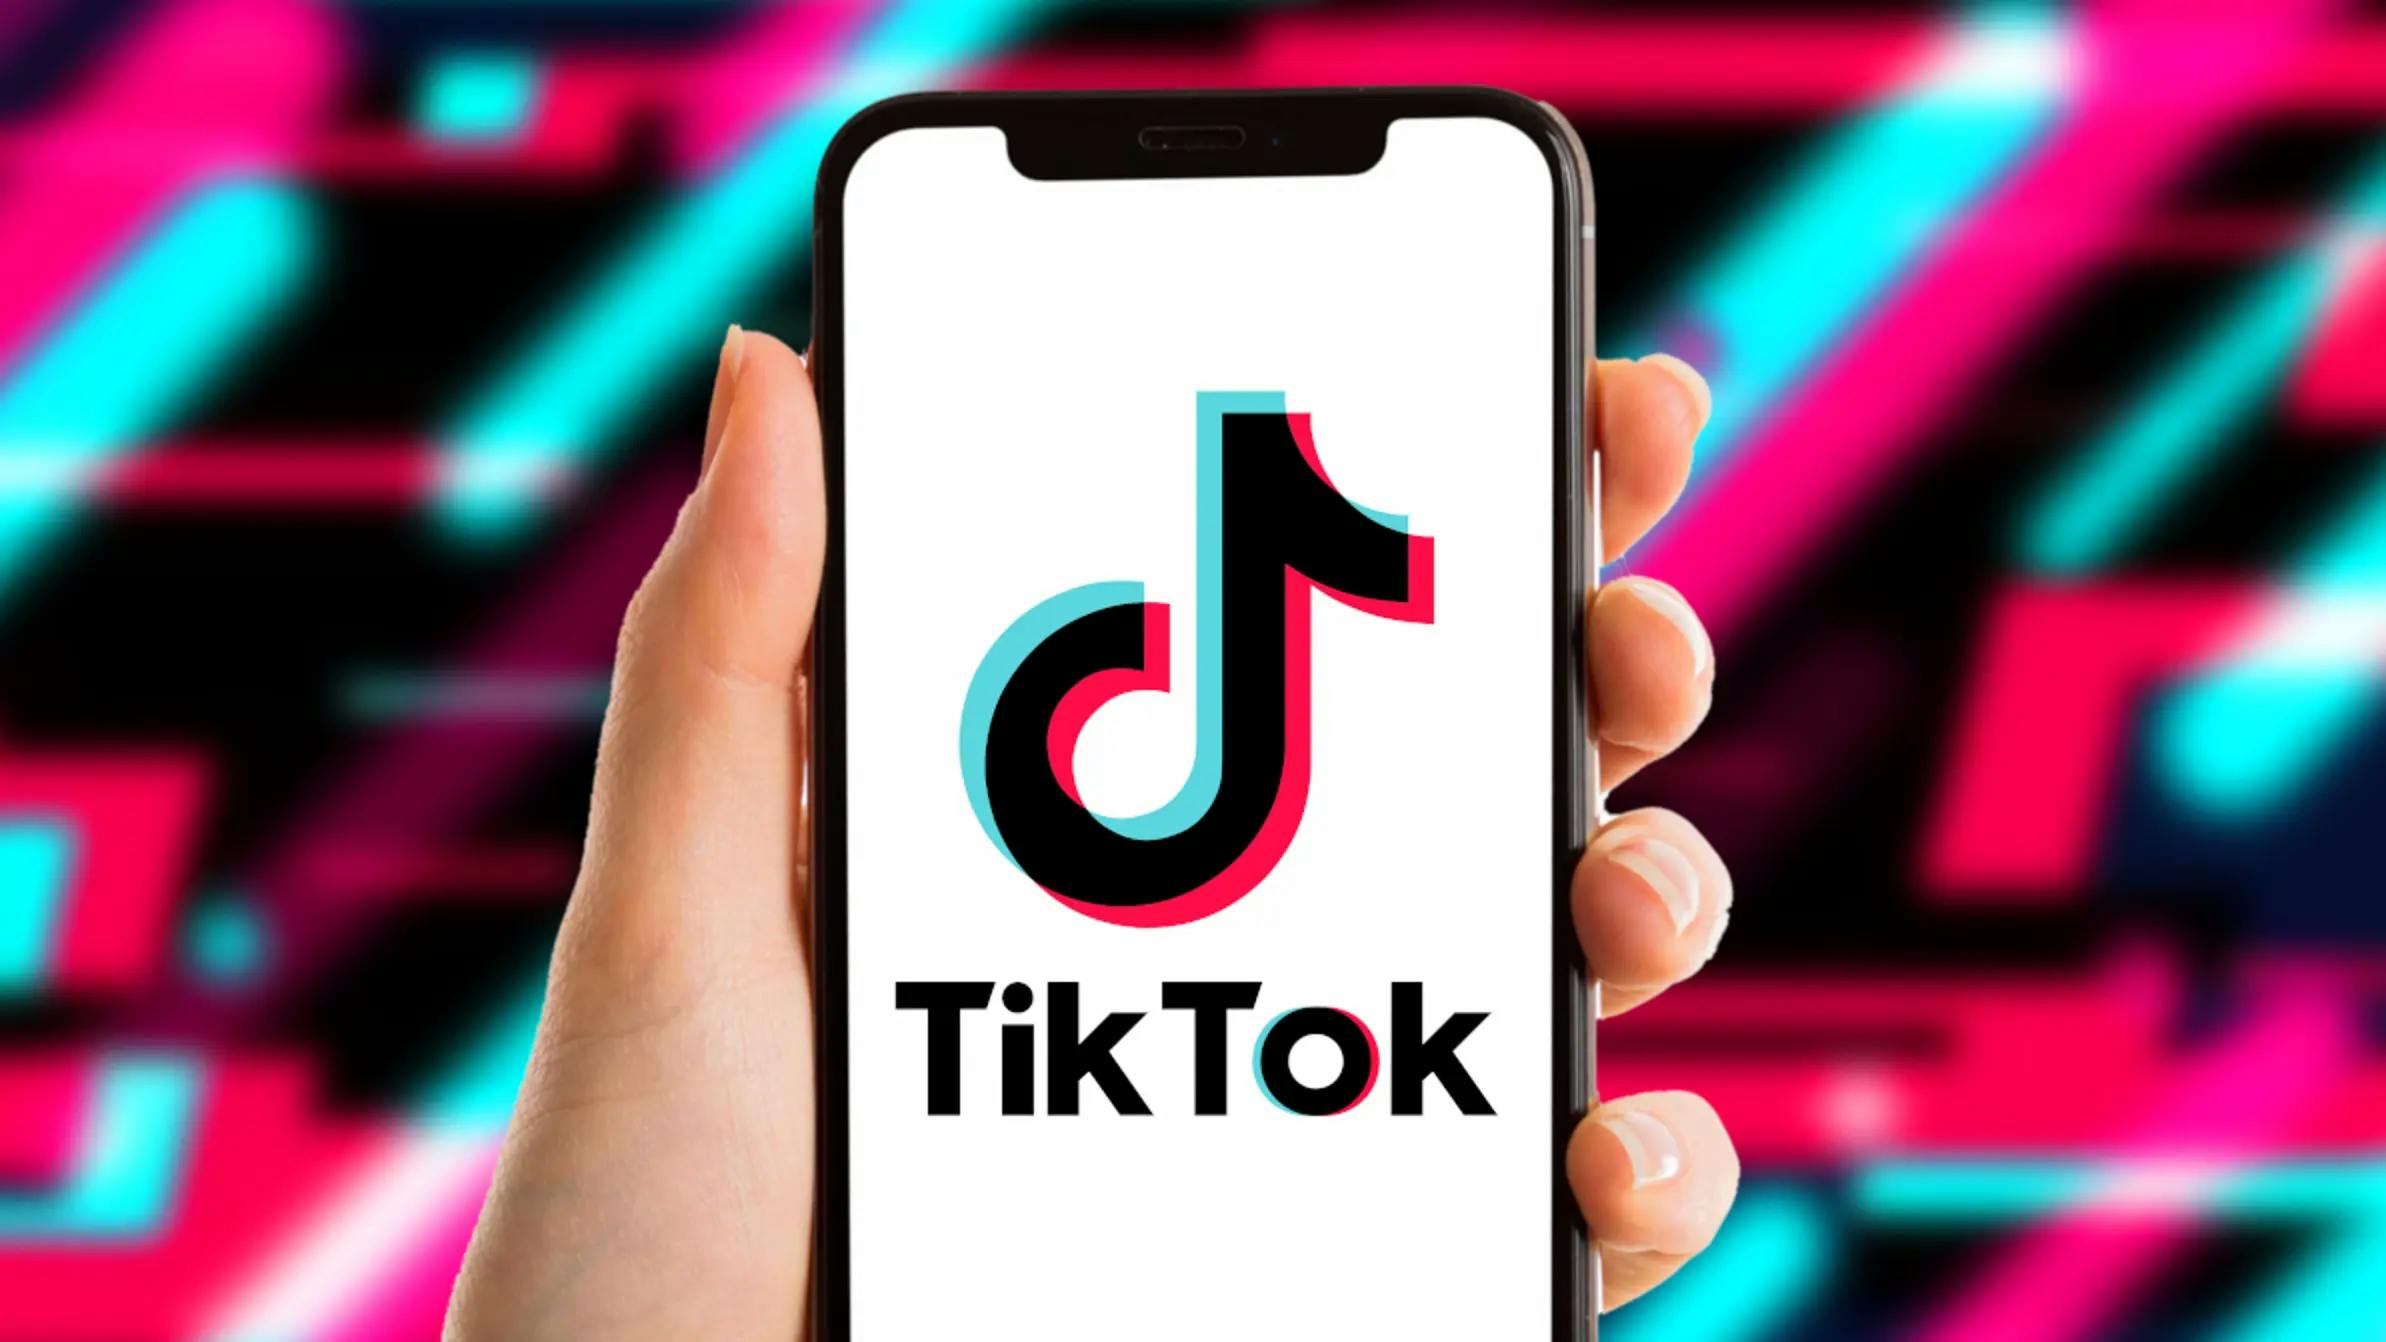 10 Creative Ideas for TikTok Videos That Will Get You Noticed